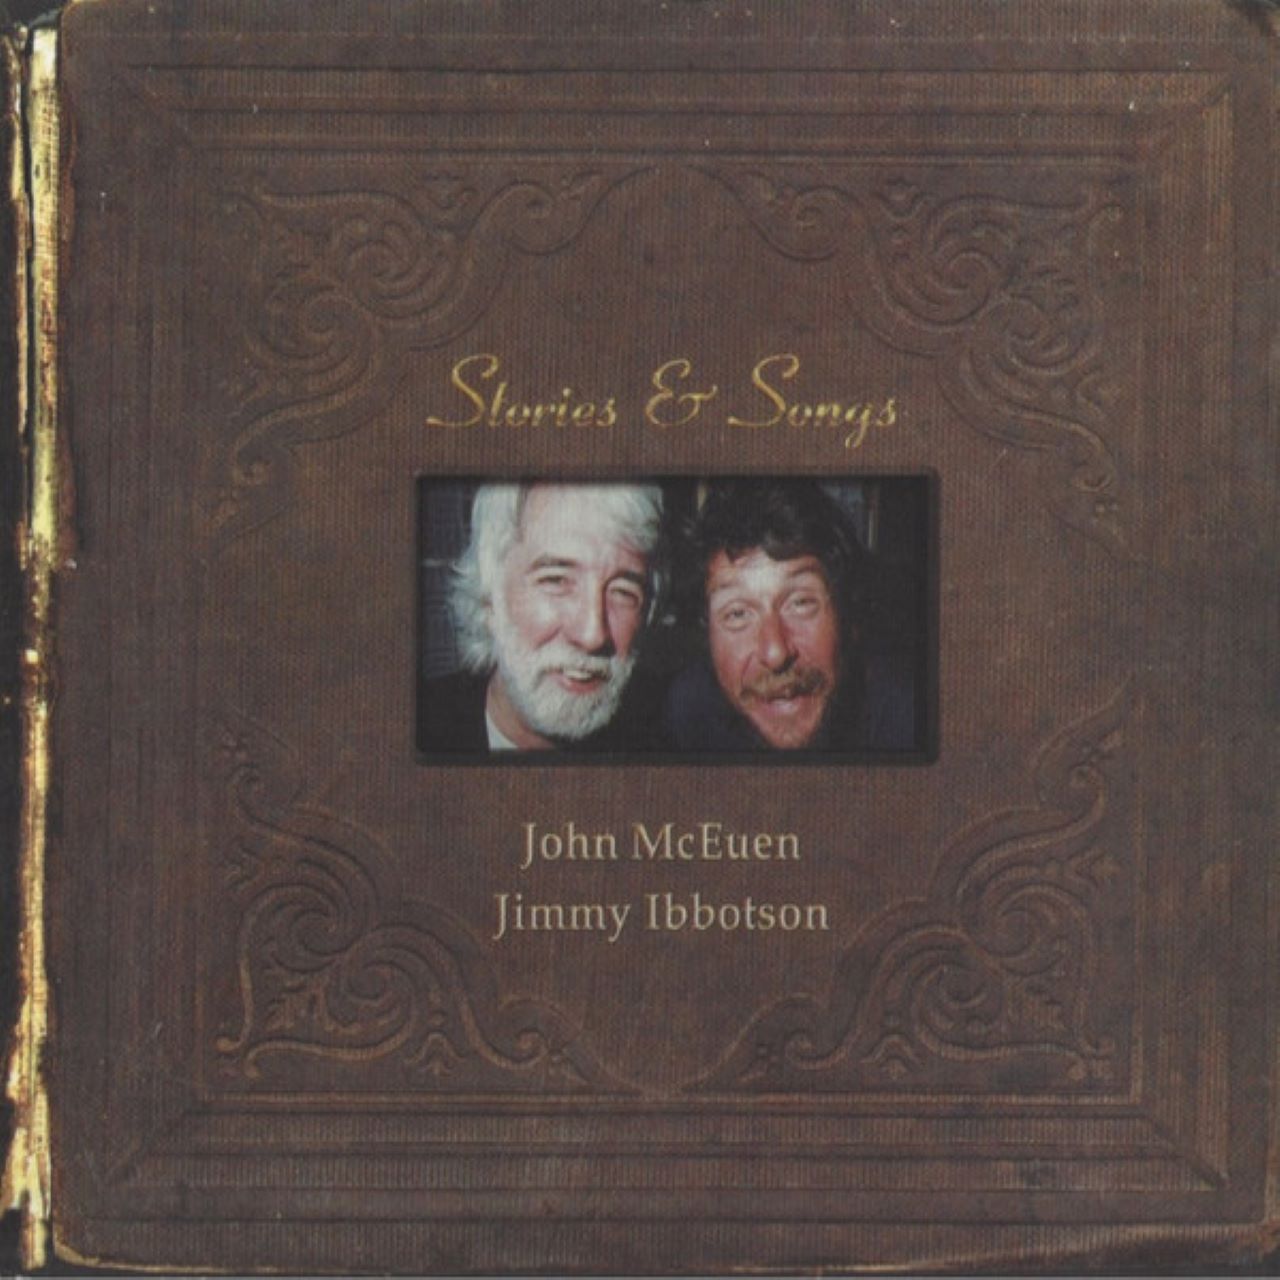 John McEuen & Jimmy Ibbotson - Stories And Songs cover album